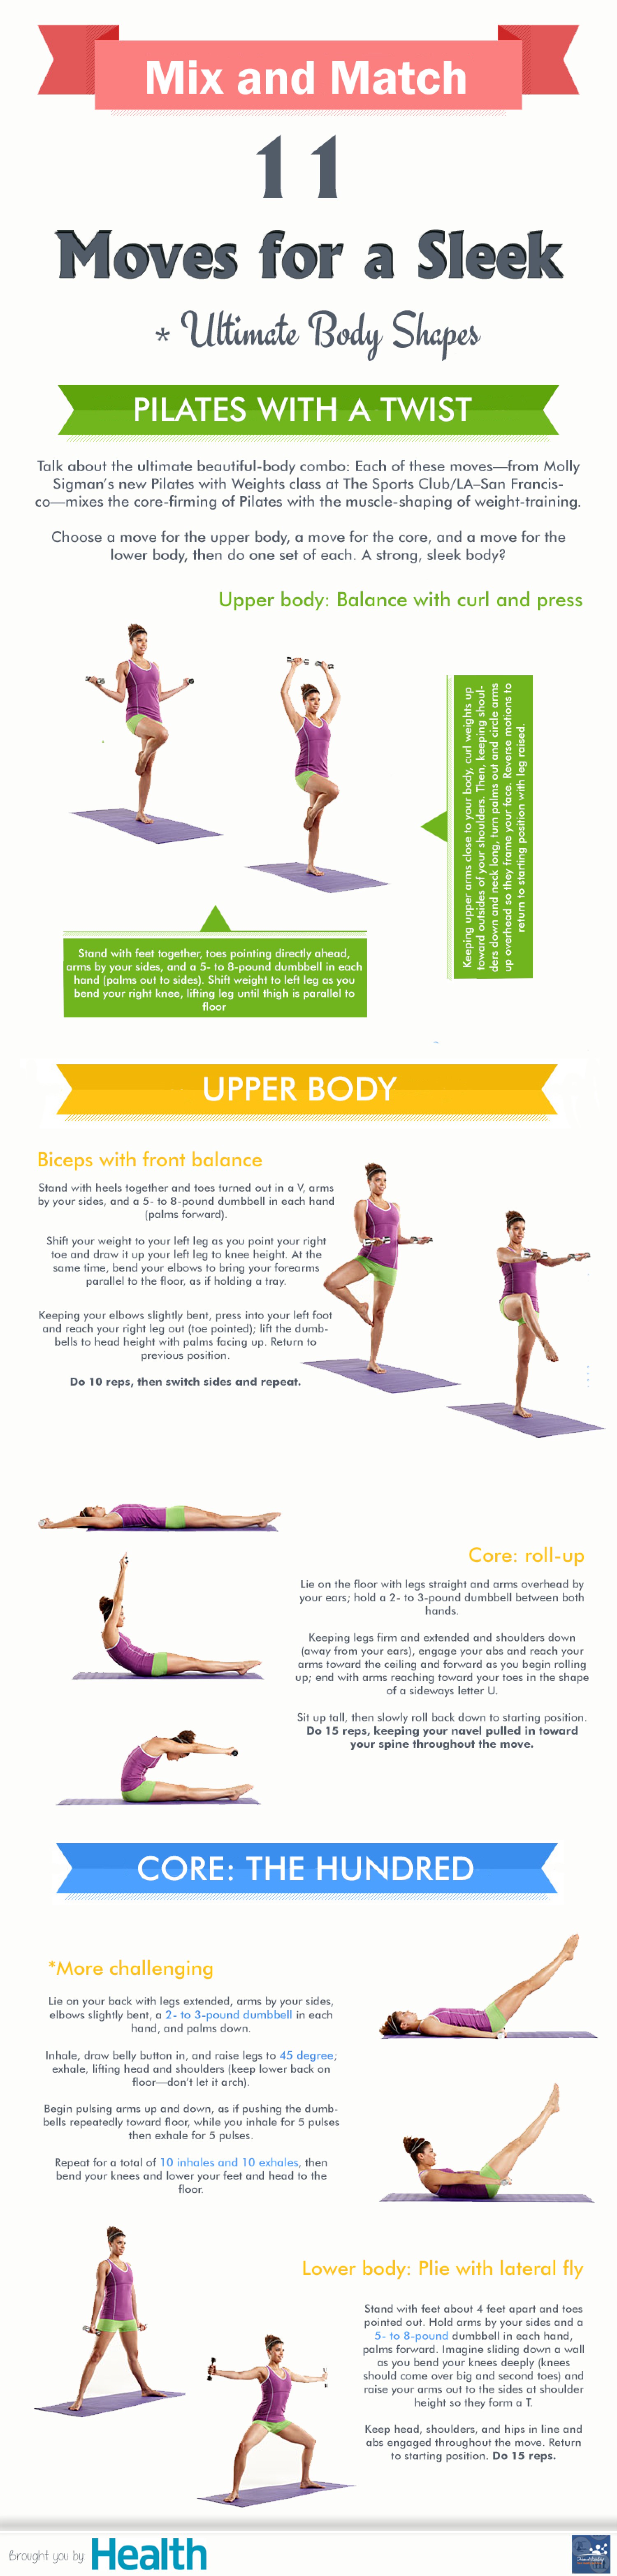 Credit: 11 Moves for a Sleek Ultimate Body Shapes by visual.y